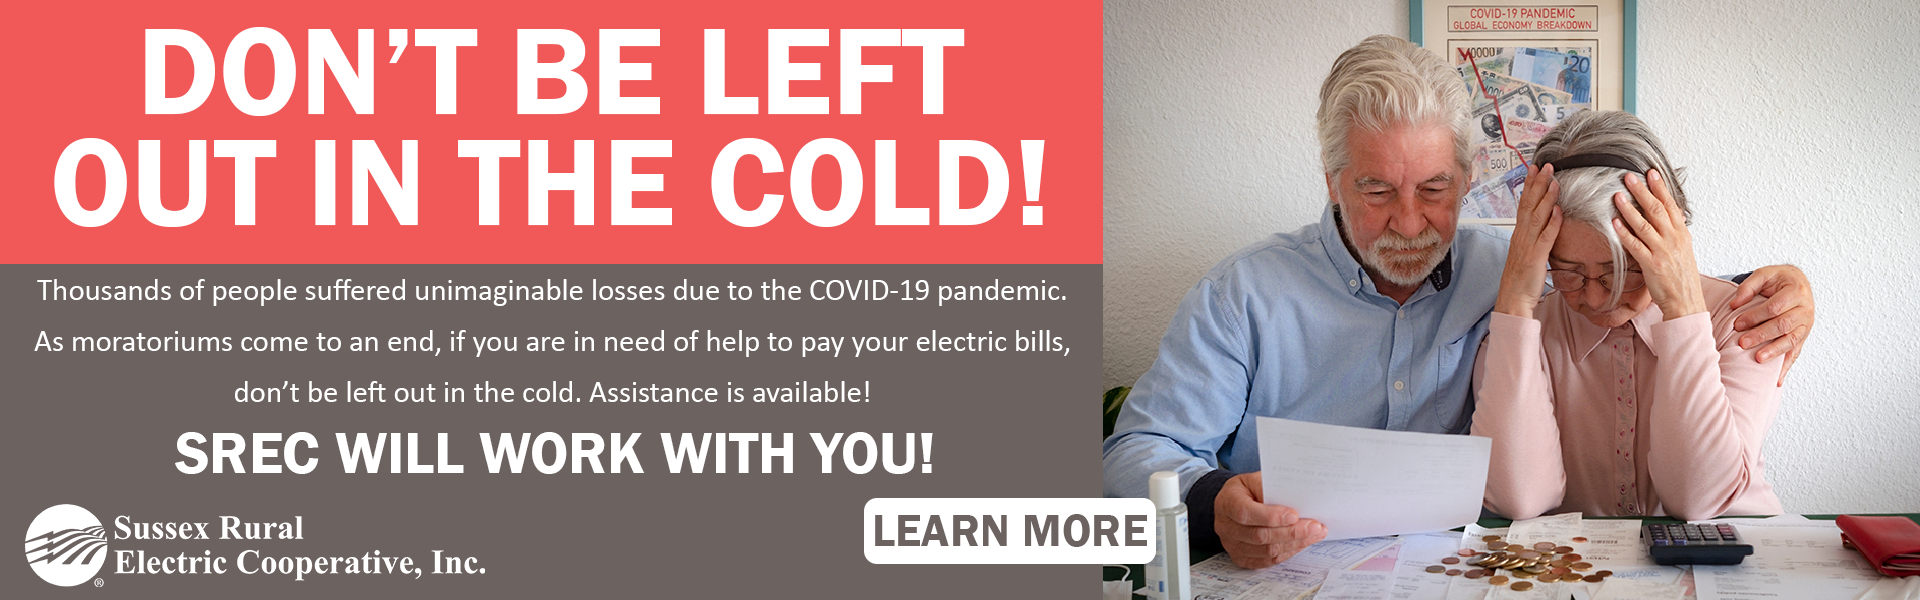 DON'T BE LEFT OUT IN THE COLD! Thousands of people suffered unimaginable losses due tot he COVID-19 pandemic. As moratoriums end, if you are in need of help to pay your electric bills, don't be left out in the cold. Assistance is available! SREC WILL WORK WITH YOU!